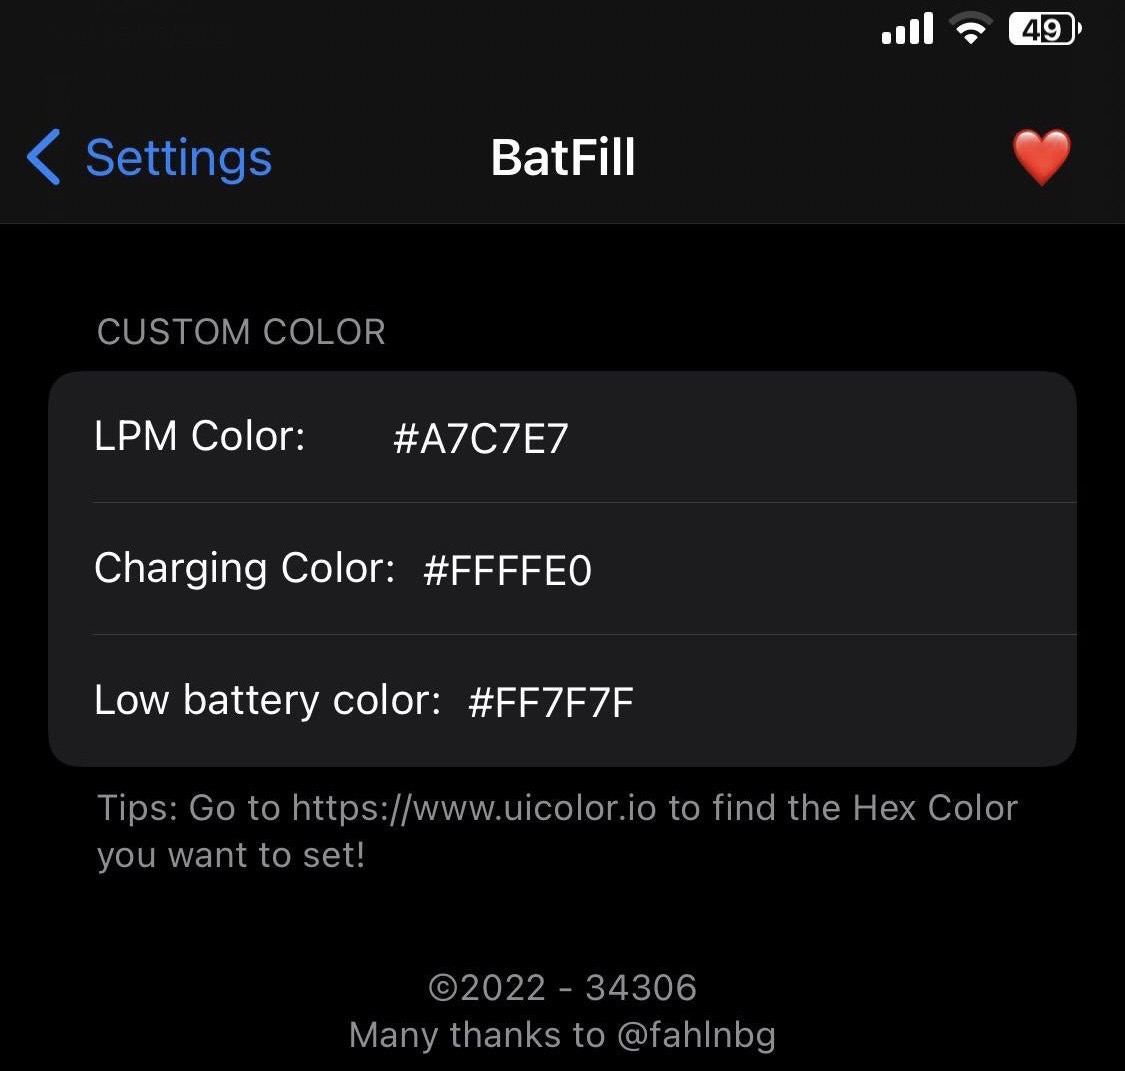 BatFill brings iOS 16.1’s redesigned Status Bar battery level indicator to jailbroken devices.